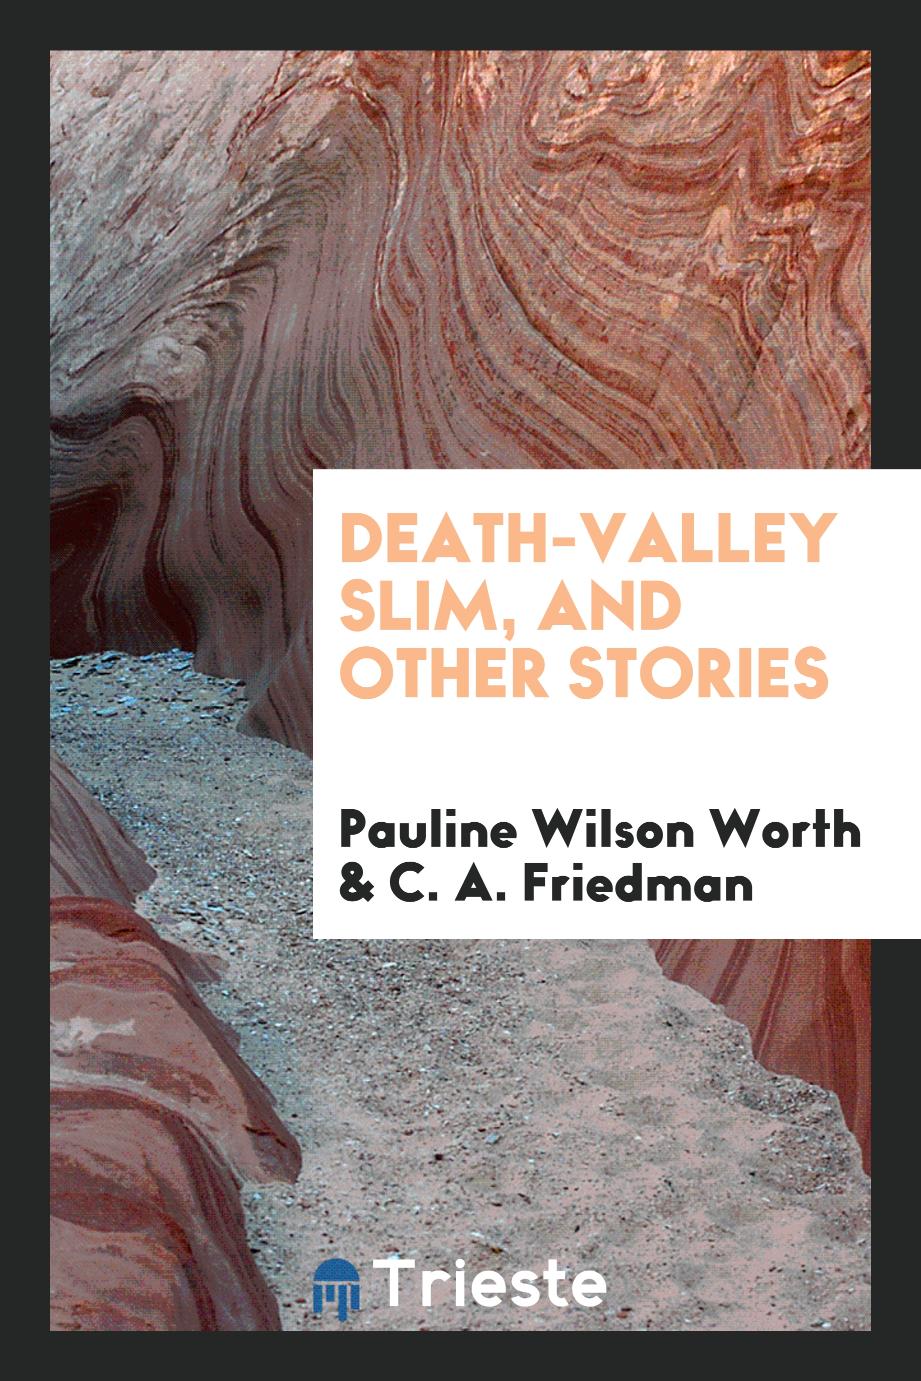 Death-Valley Slim, and other stories